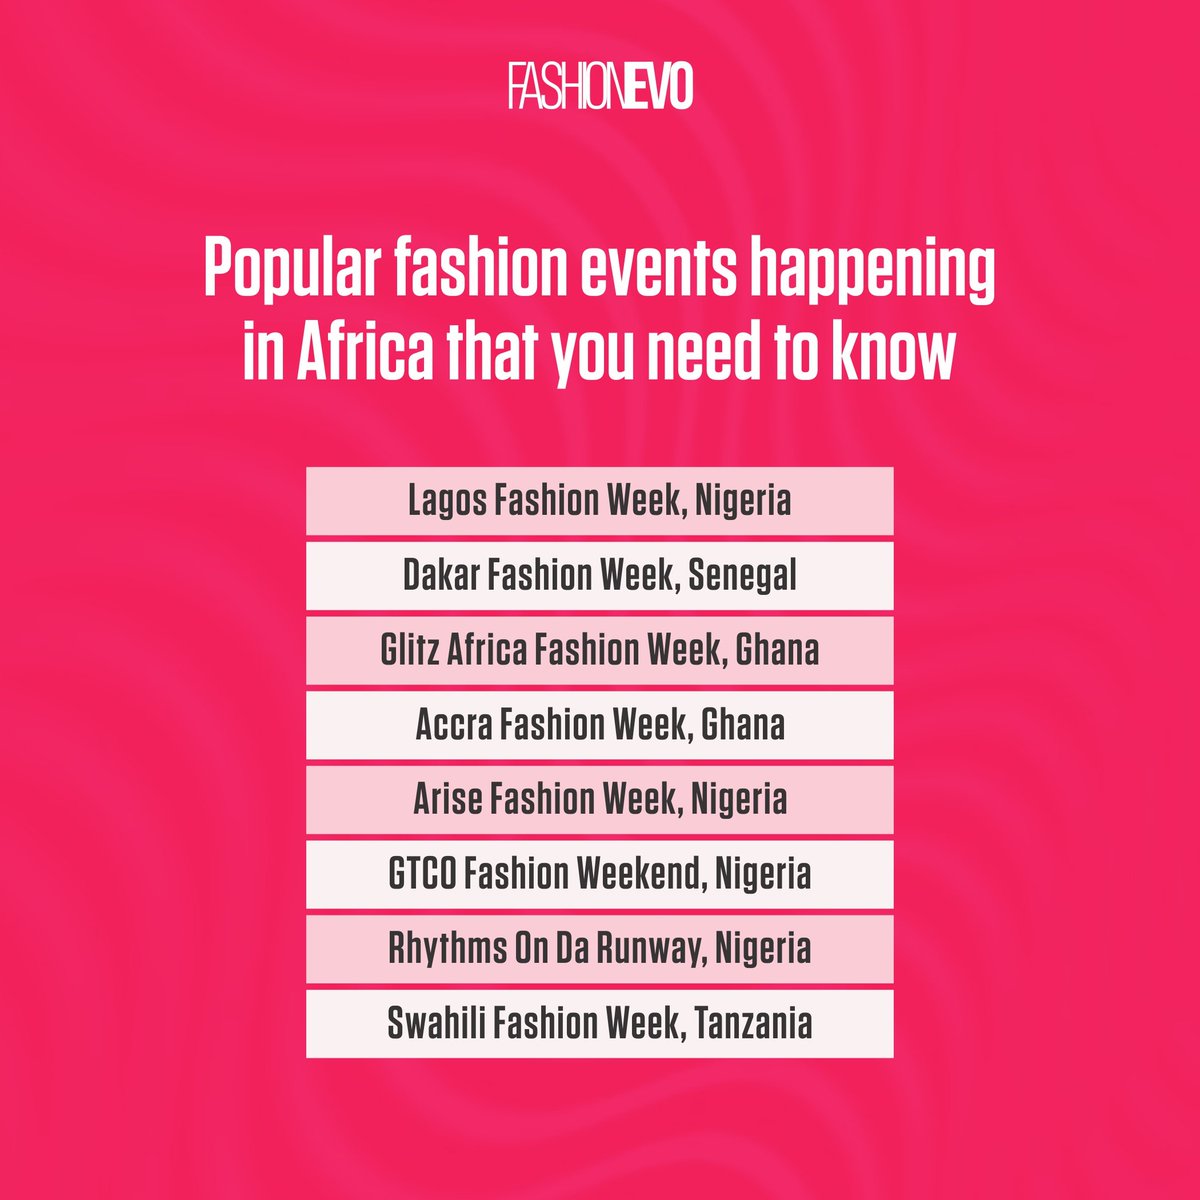 Attention fashion lovers!
We've rounded up some of the most popular fashion events happening in Africa that you simply can't miss.
Mark your calendars and get ready to immerse yourself in the incredible world of African fashion!